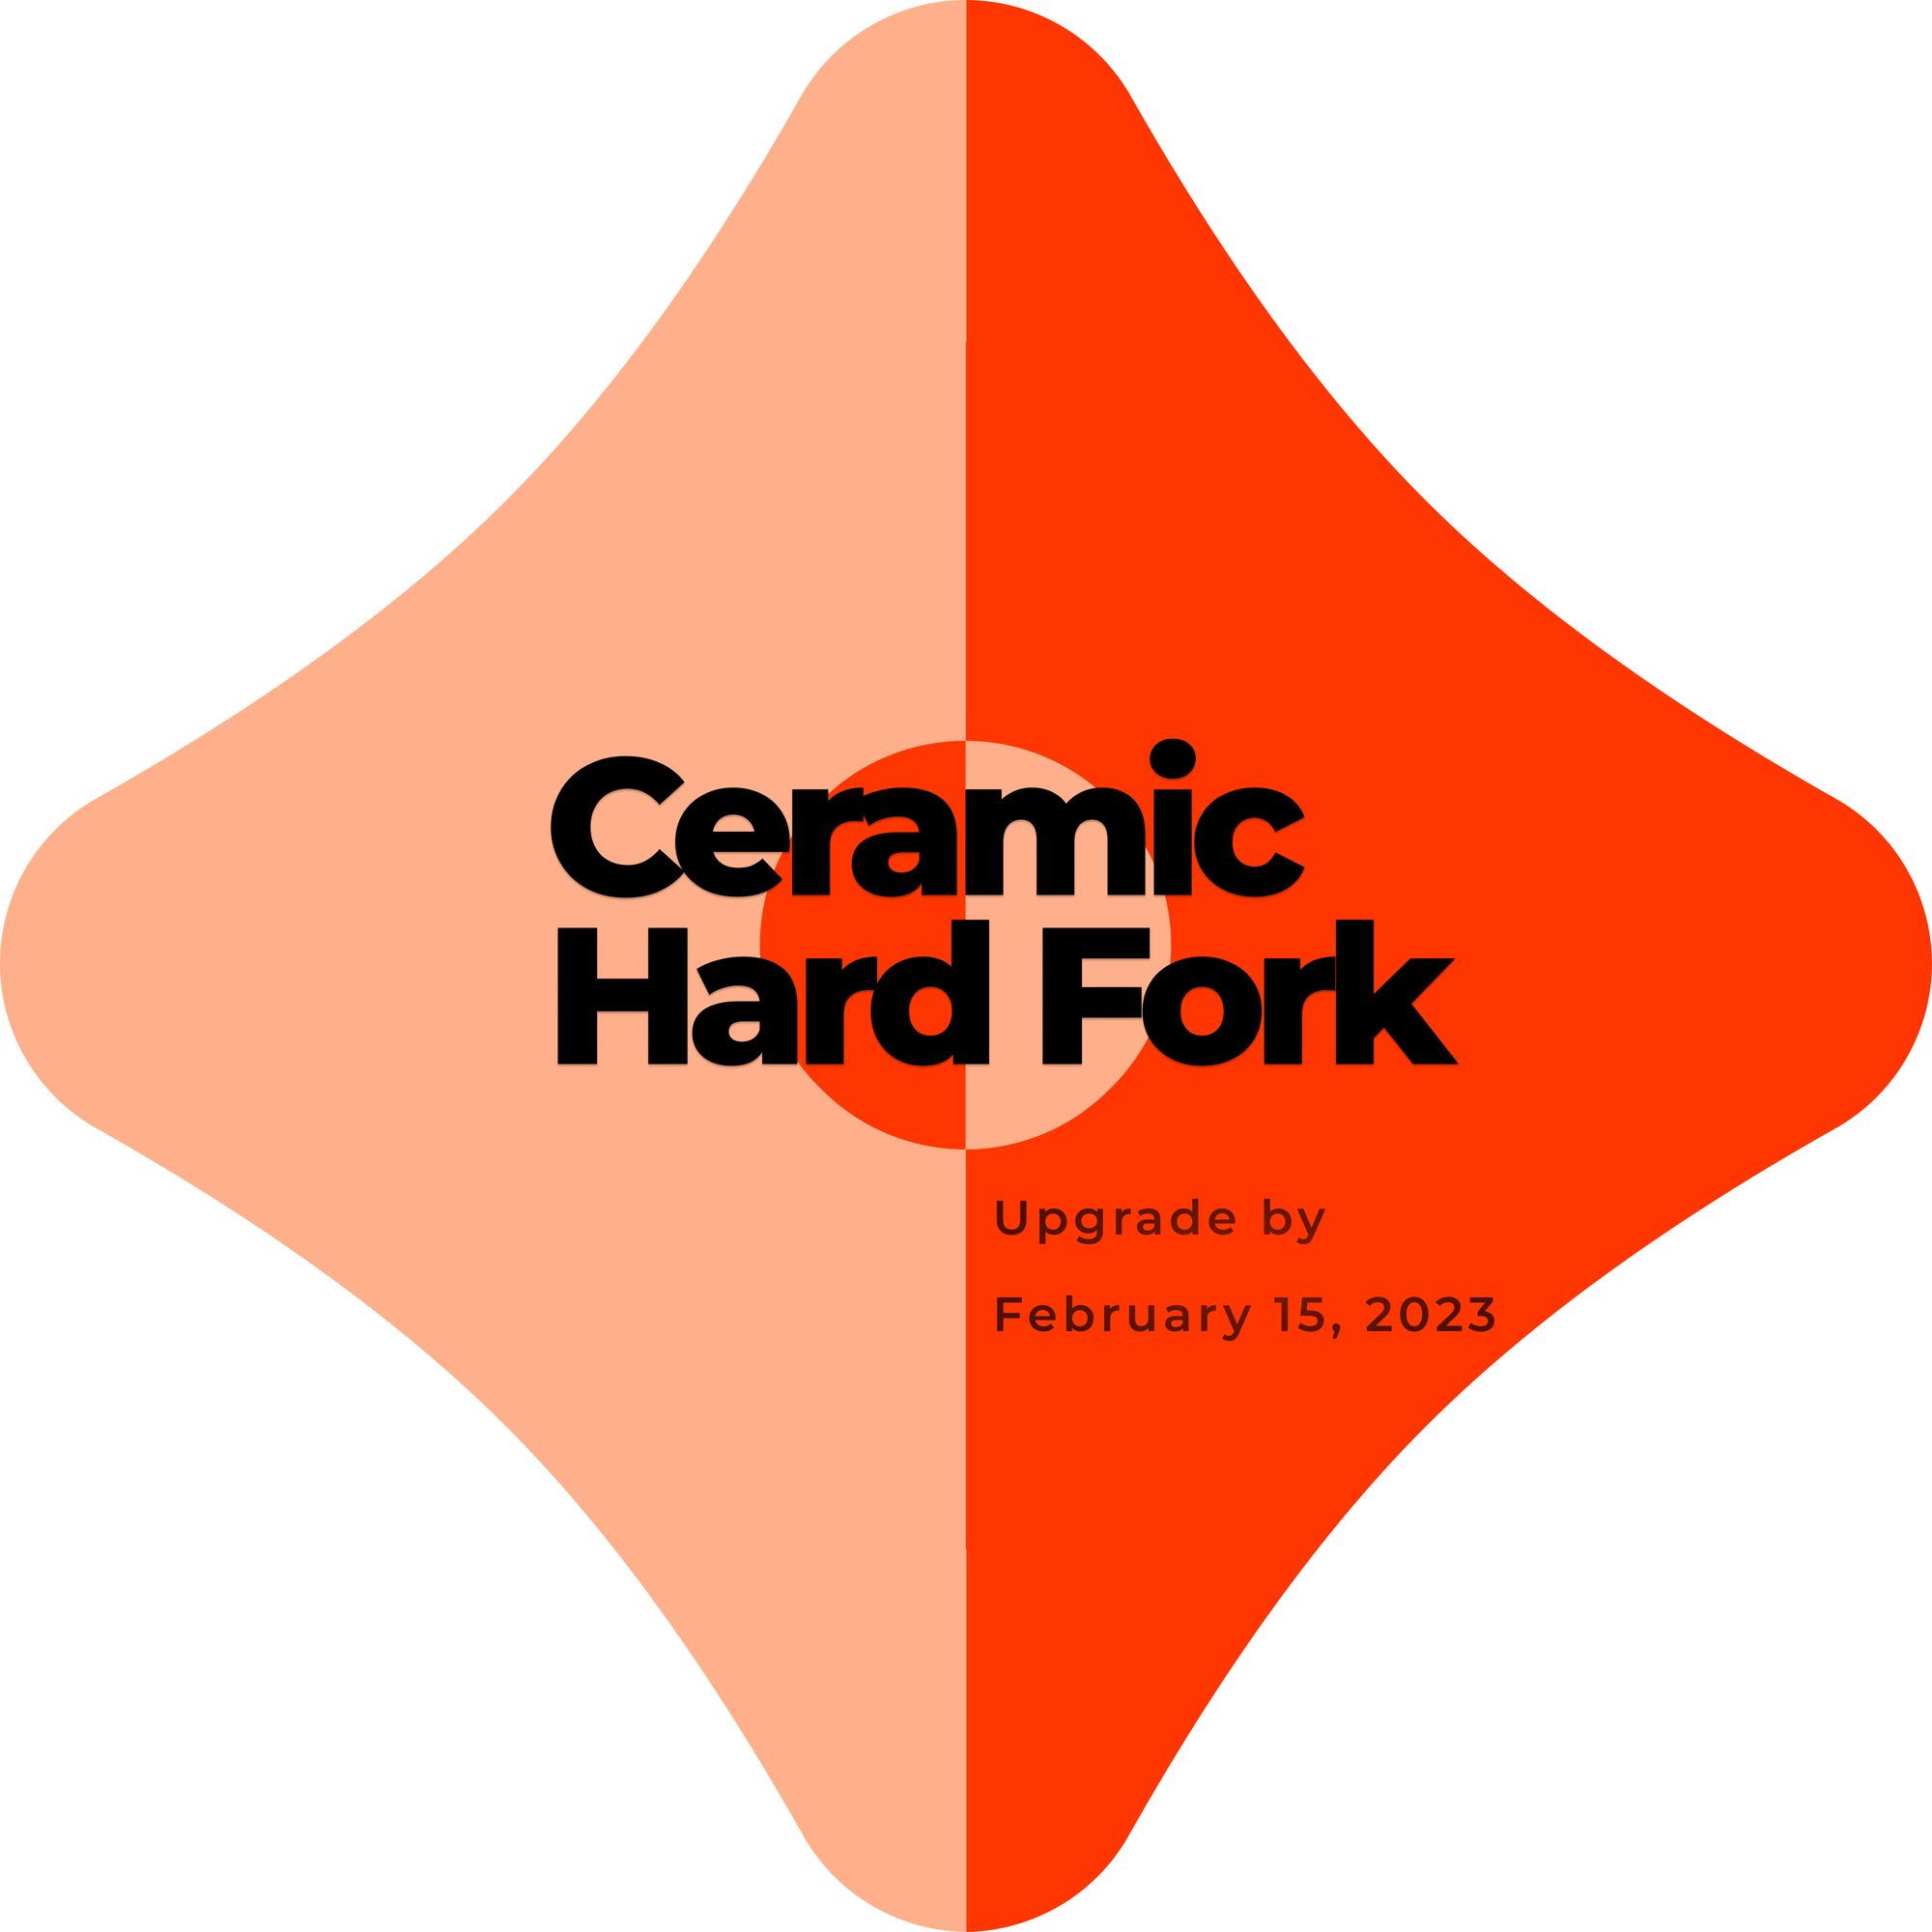 Upgrade Your Node Before the Ceramic Hard Fork on February 15, 2023